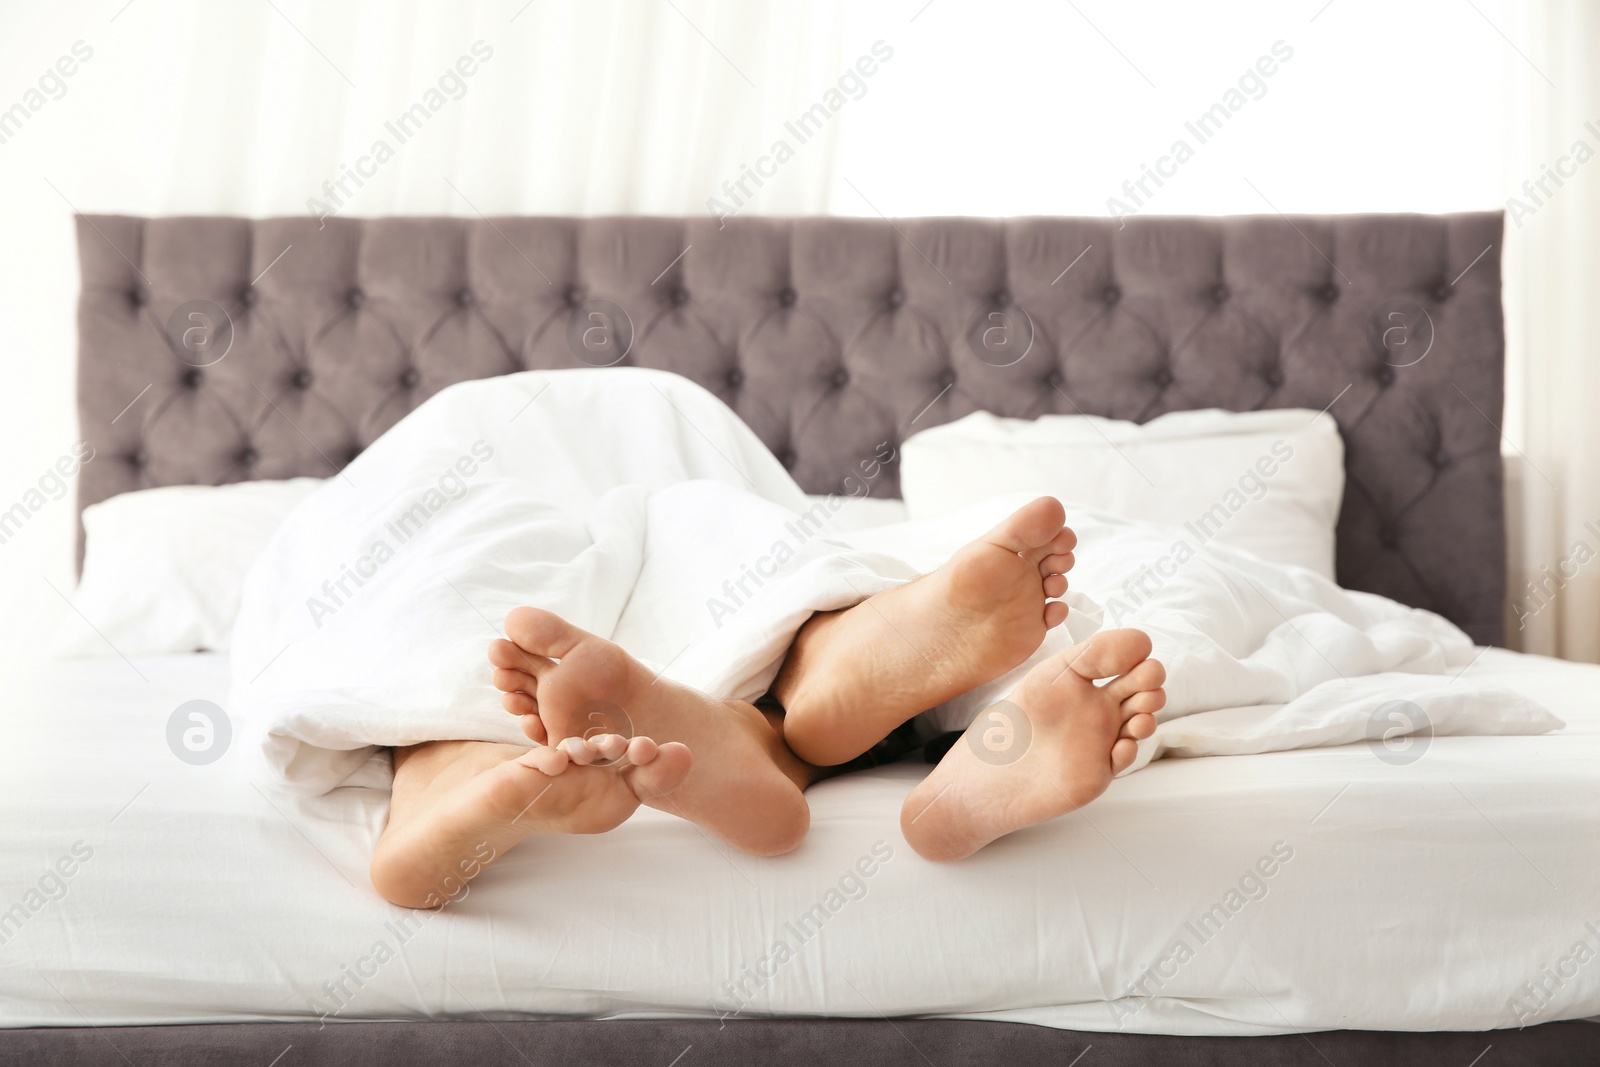 Photo of Gay couple cuddling under blanket on bed, closeup of feet